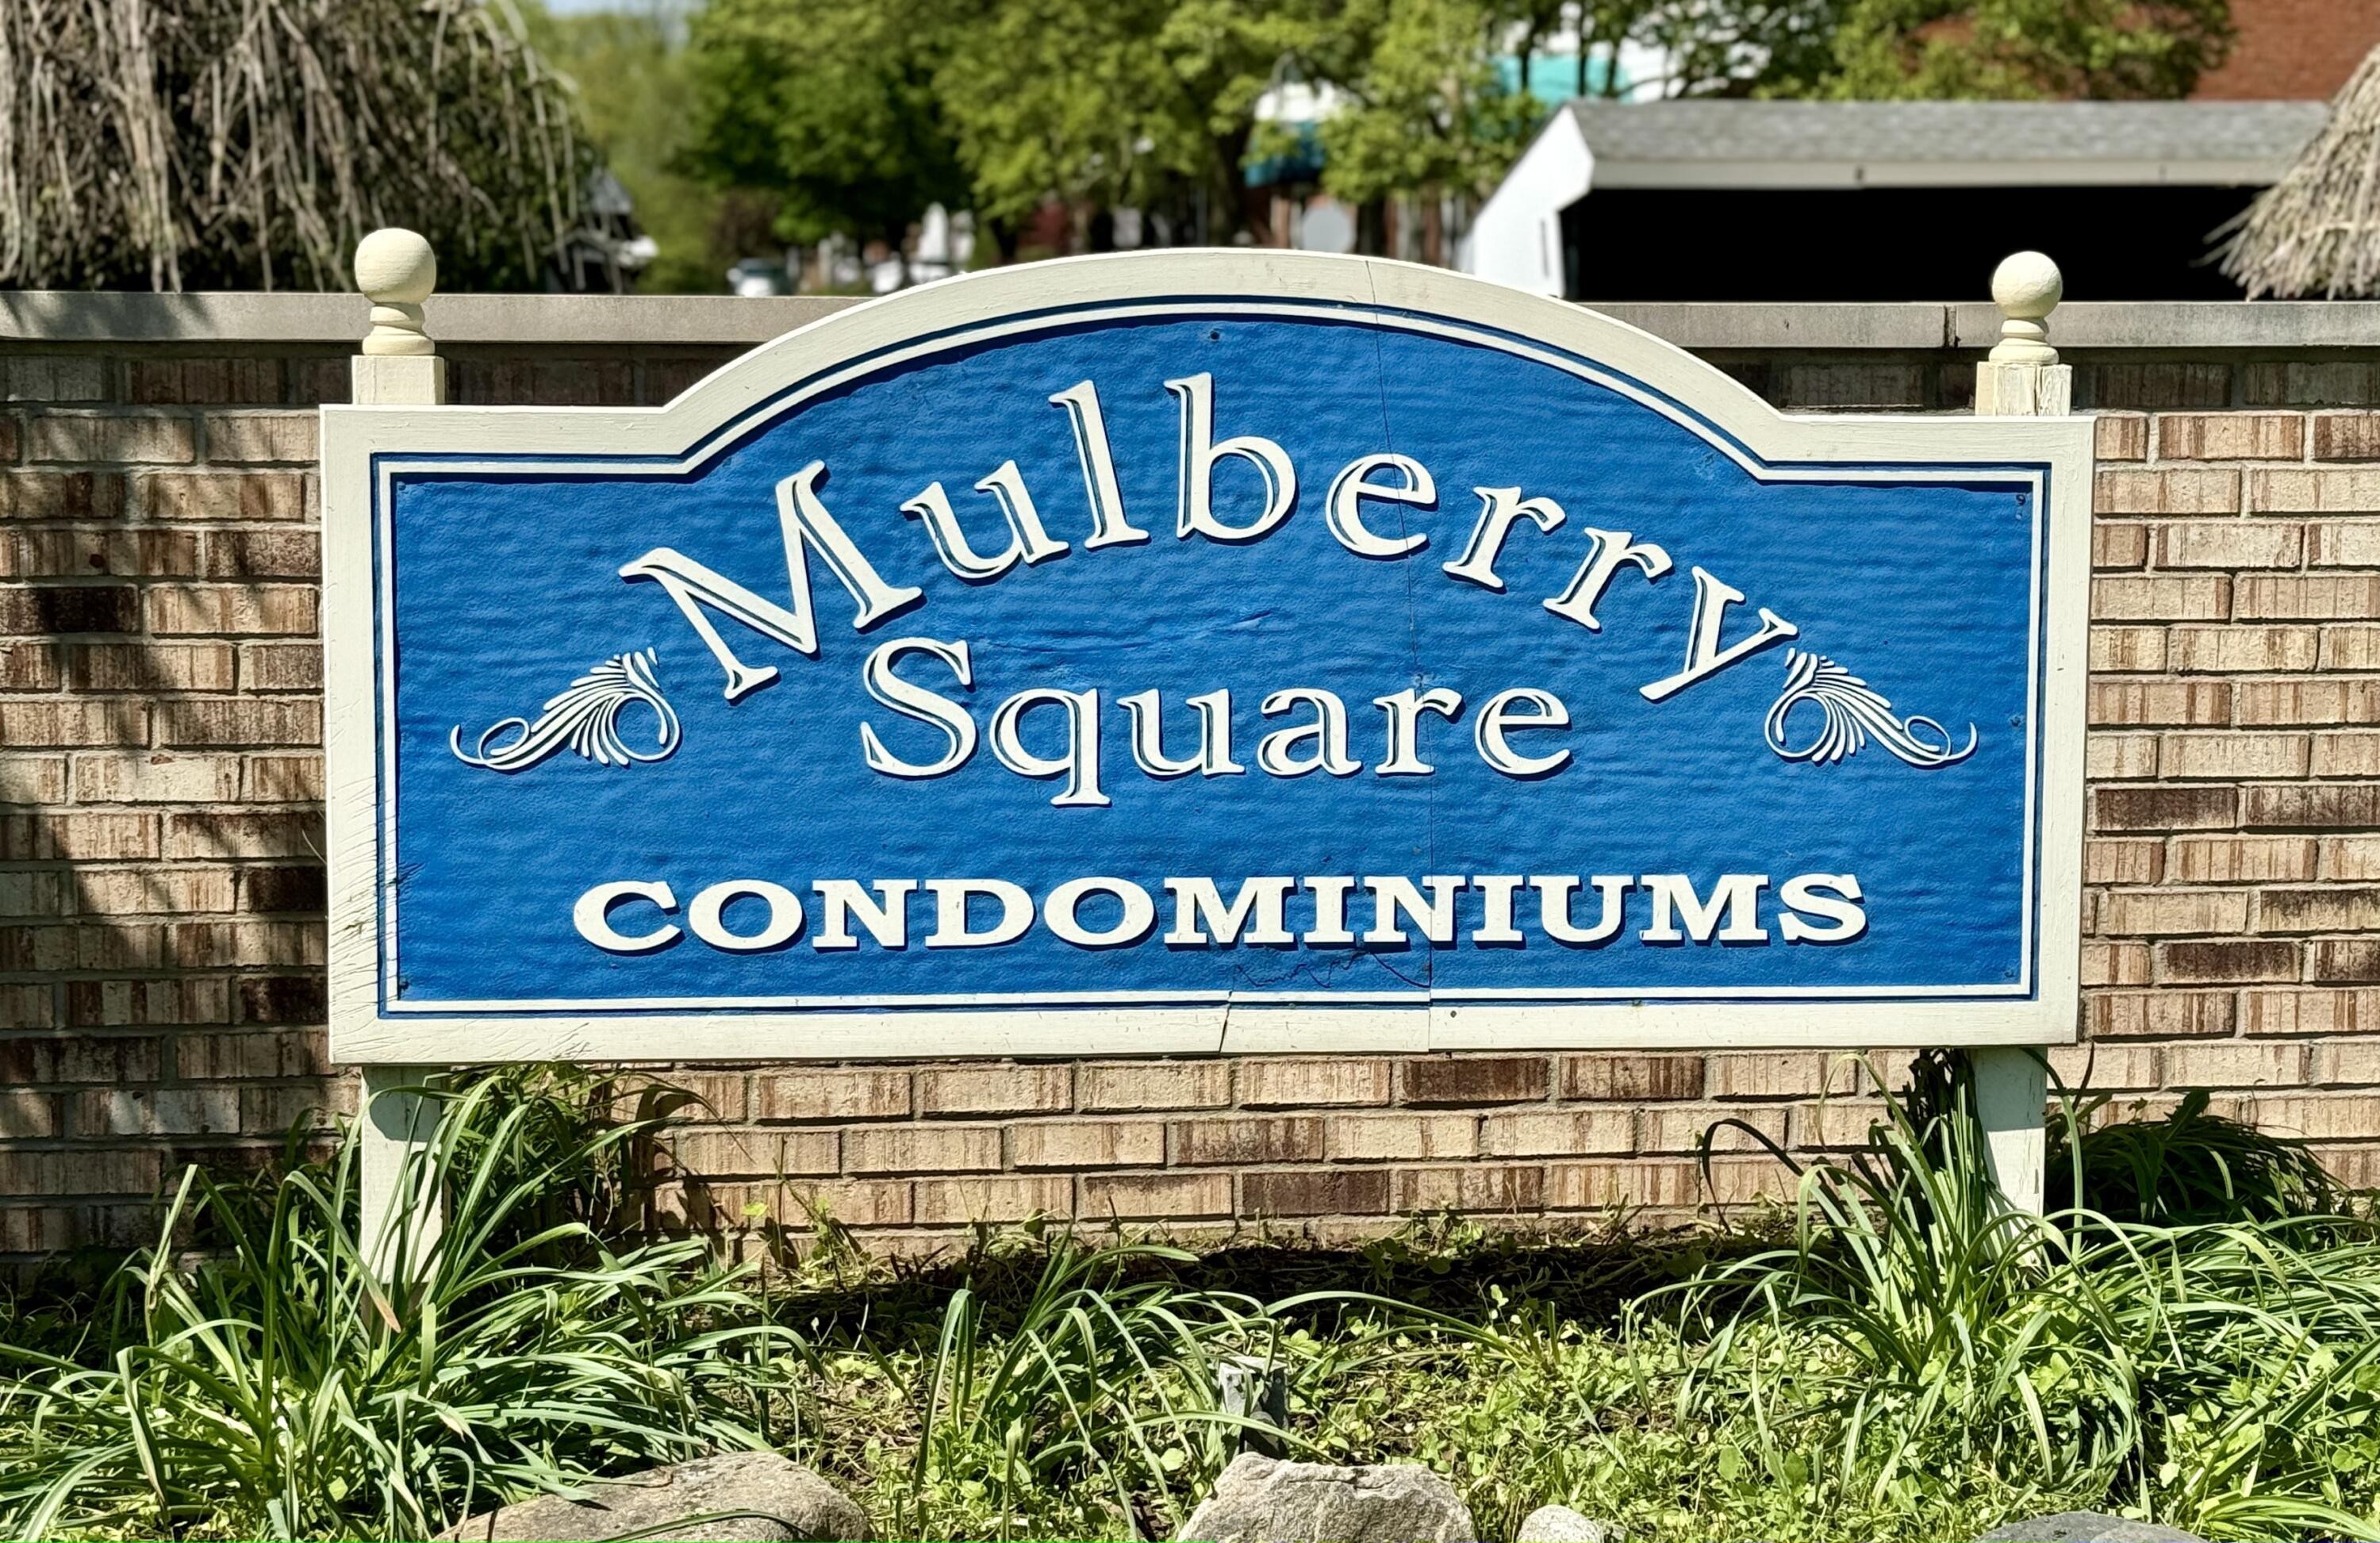 4. 2471 Mulberry Square